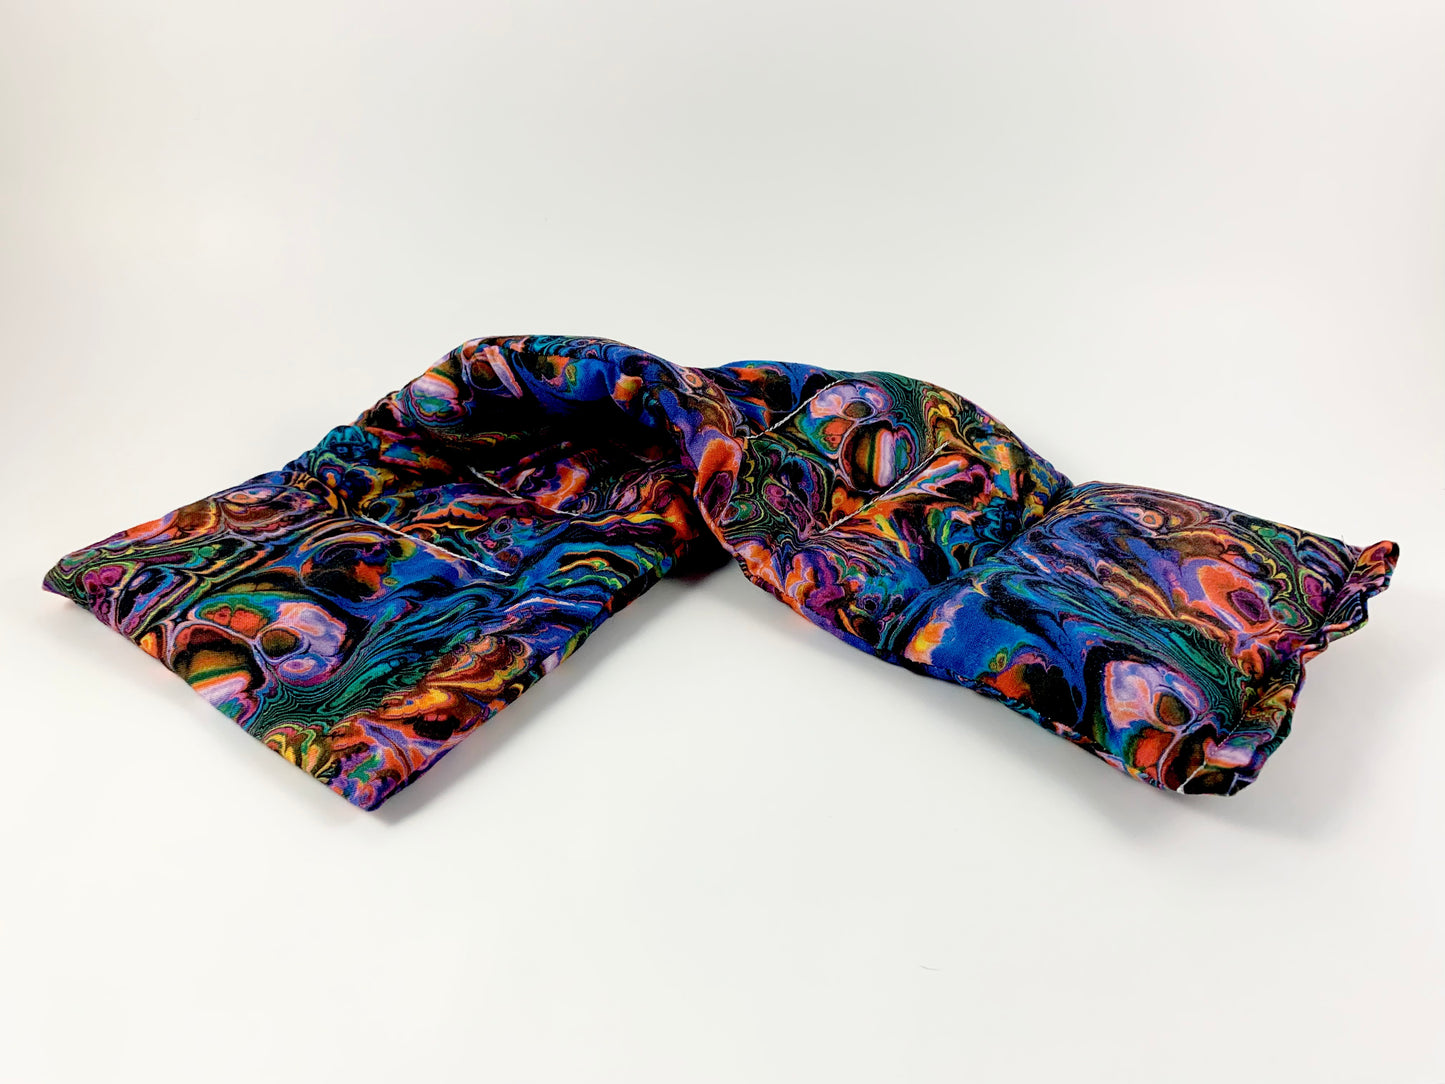 Psychedelic Blue Giant Neck Wrap